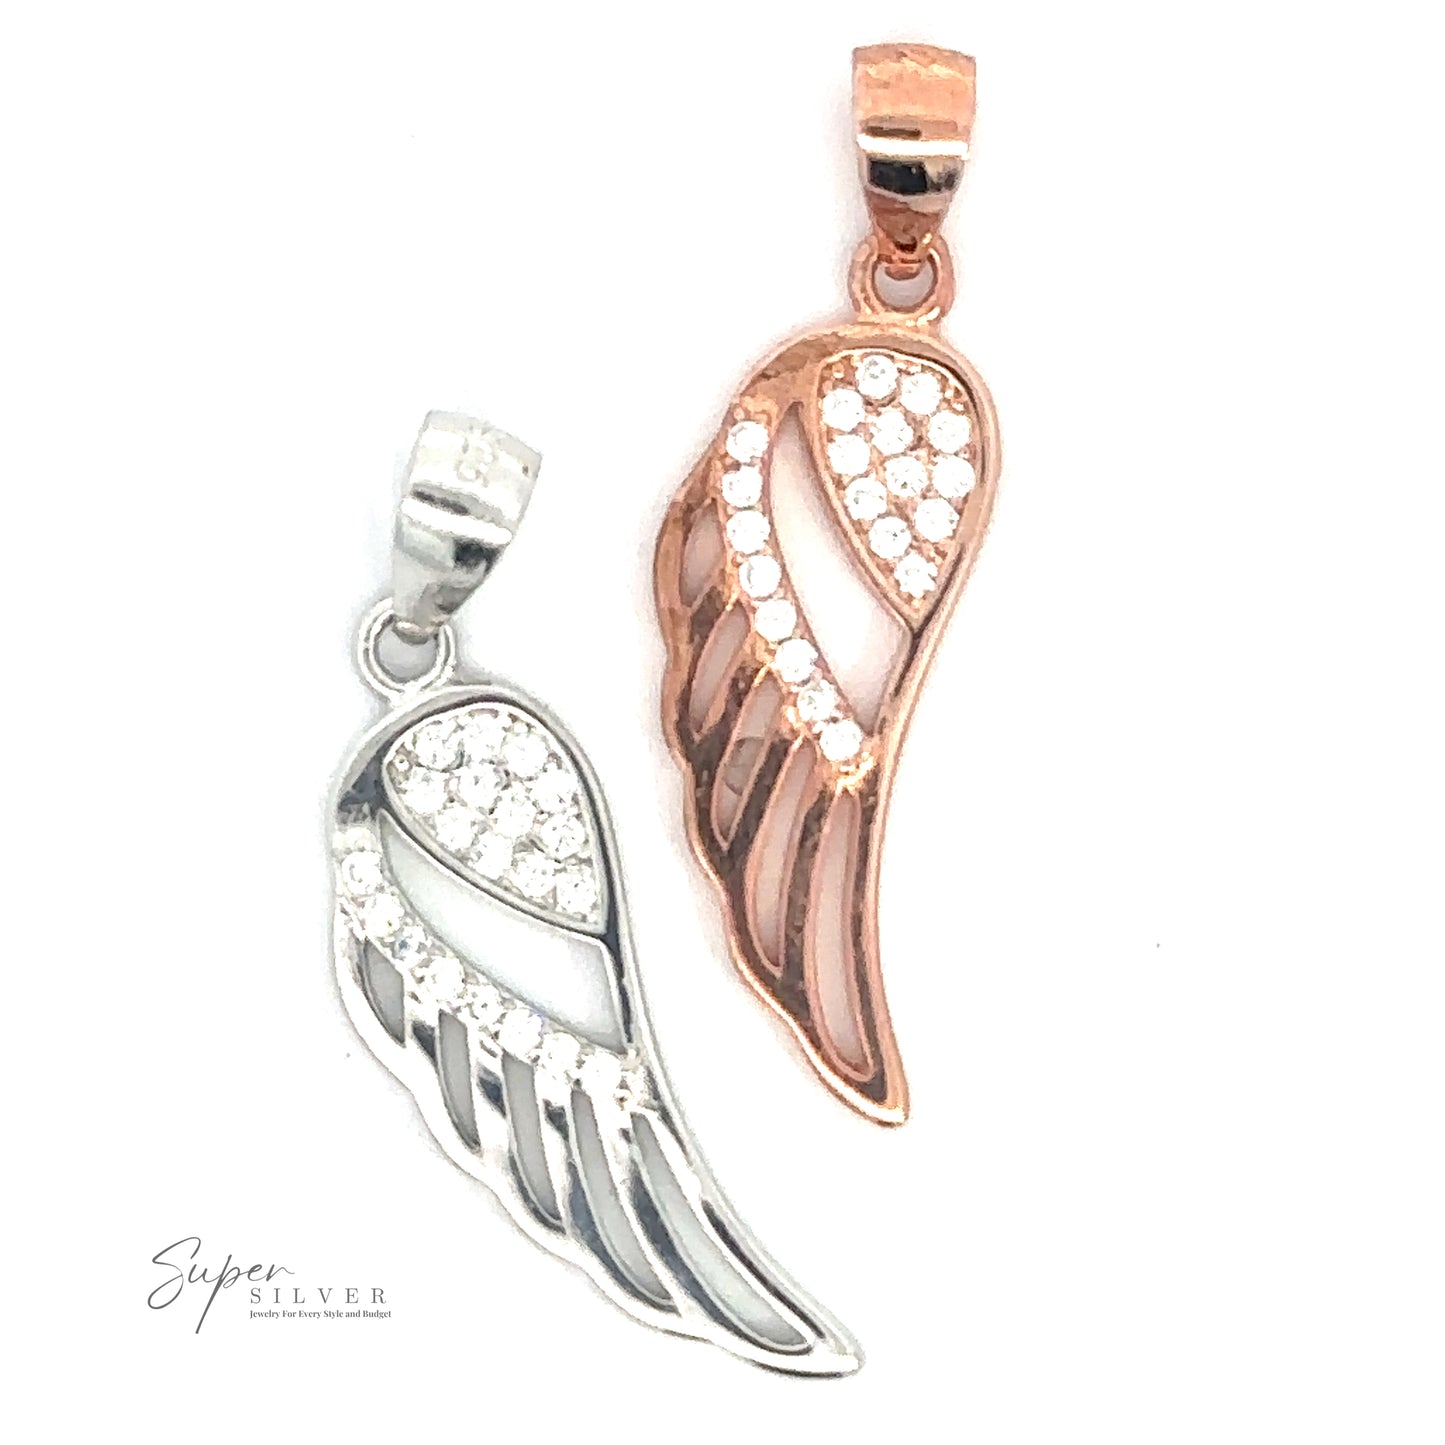 
                  
                    Two Cubic Zirconia Feather Shaped Pendants, one sterling silver with cubic zirconia and one rose gold with crystals, are displayed side by side. The pendants feature decorative cutouts and a loop at the top for hanging.
                  
                